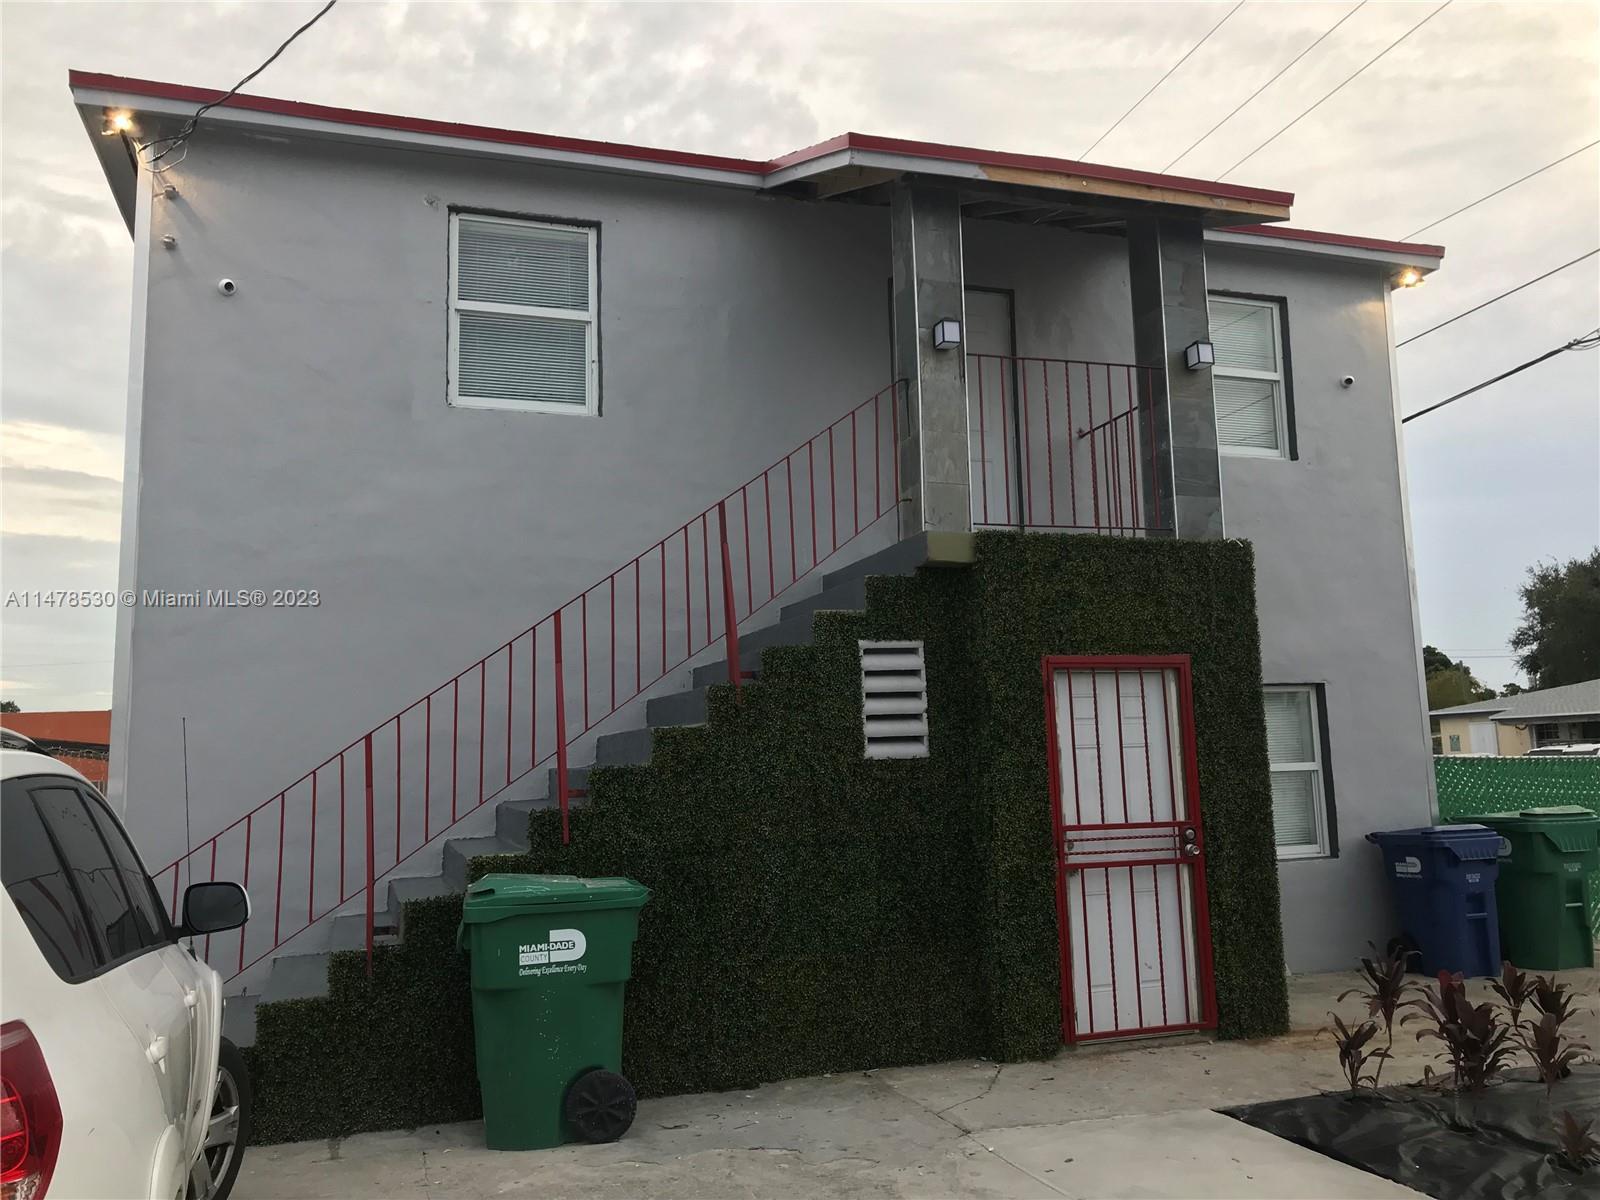 Photo of 3431 NW 32nd Ave in Miami, FL